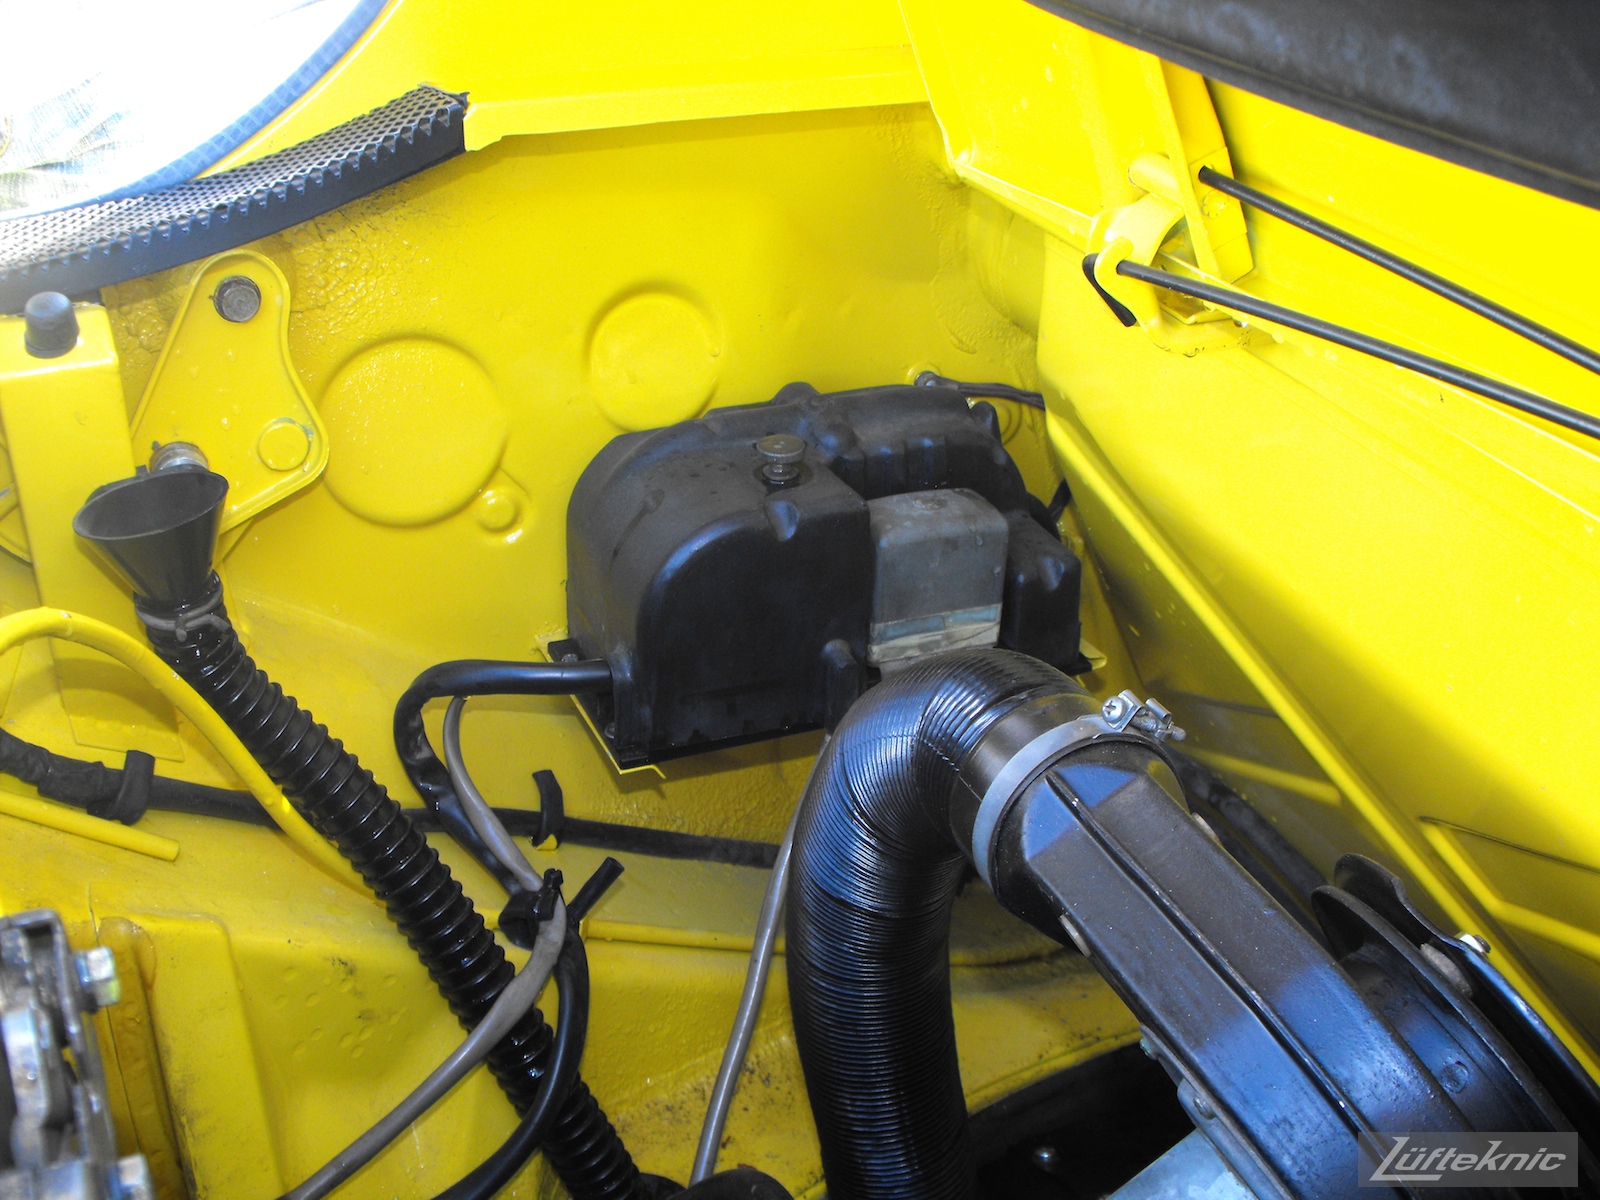 Engine details on a completely restored yellow Porsche 914 posing in the parking lot of Lufteknic.